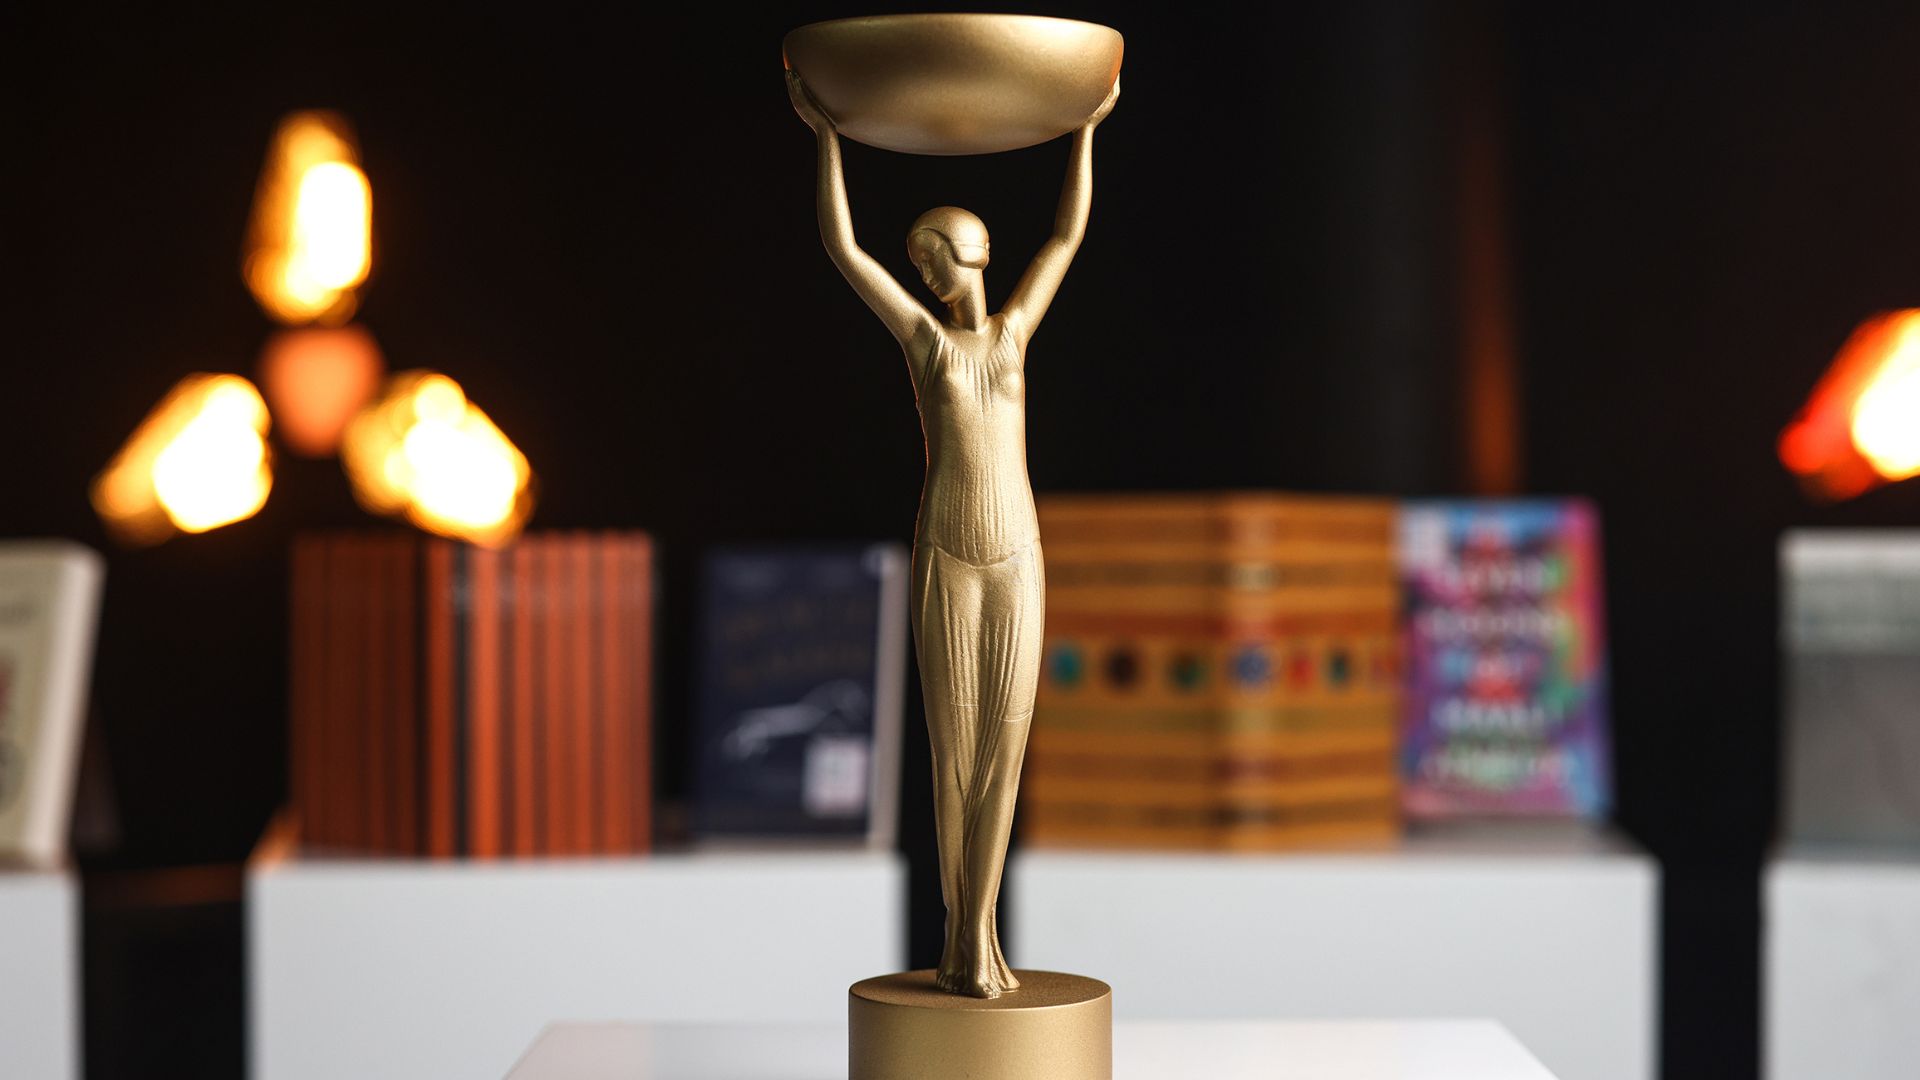 What's in a name? The newly reinstated Booker Prize statuette